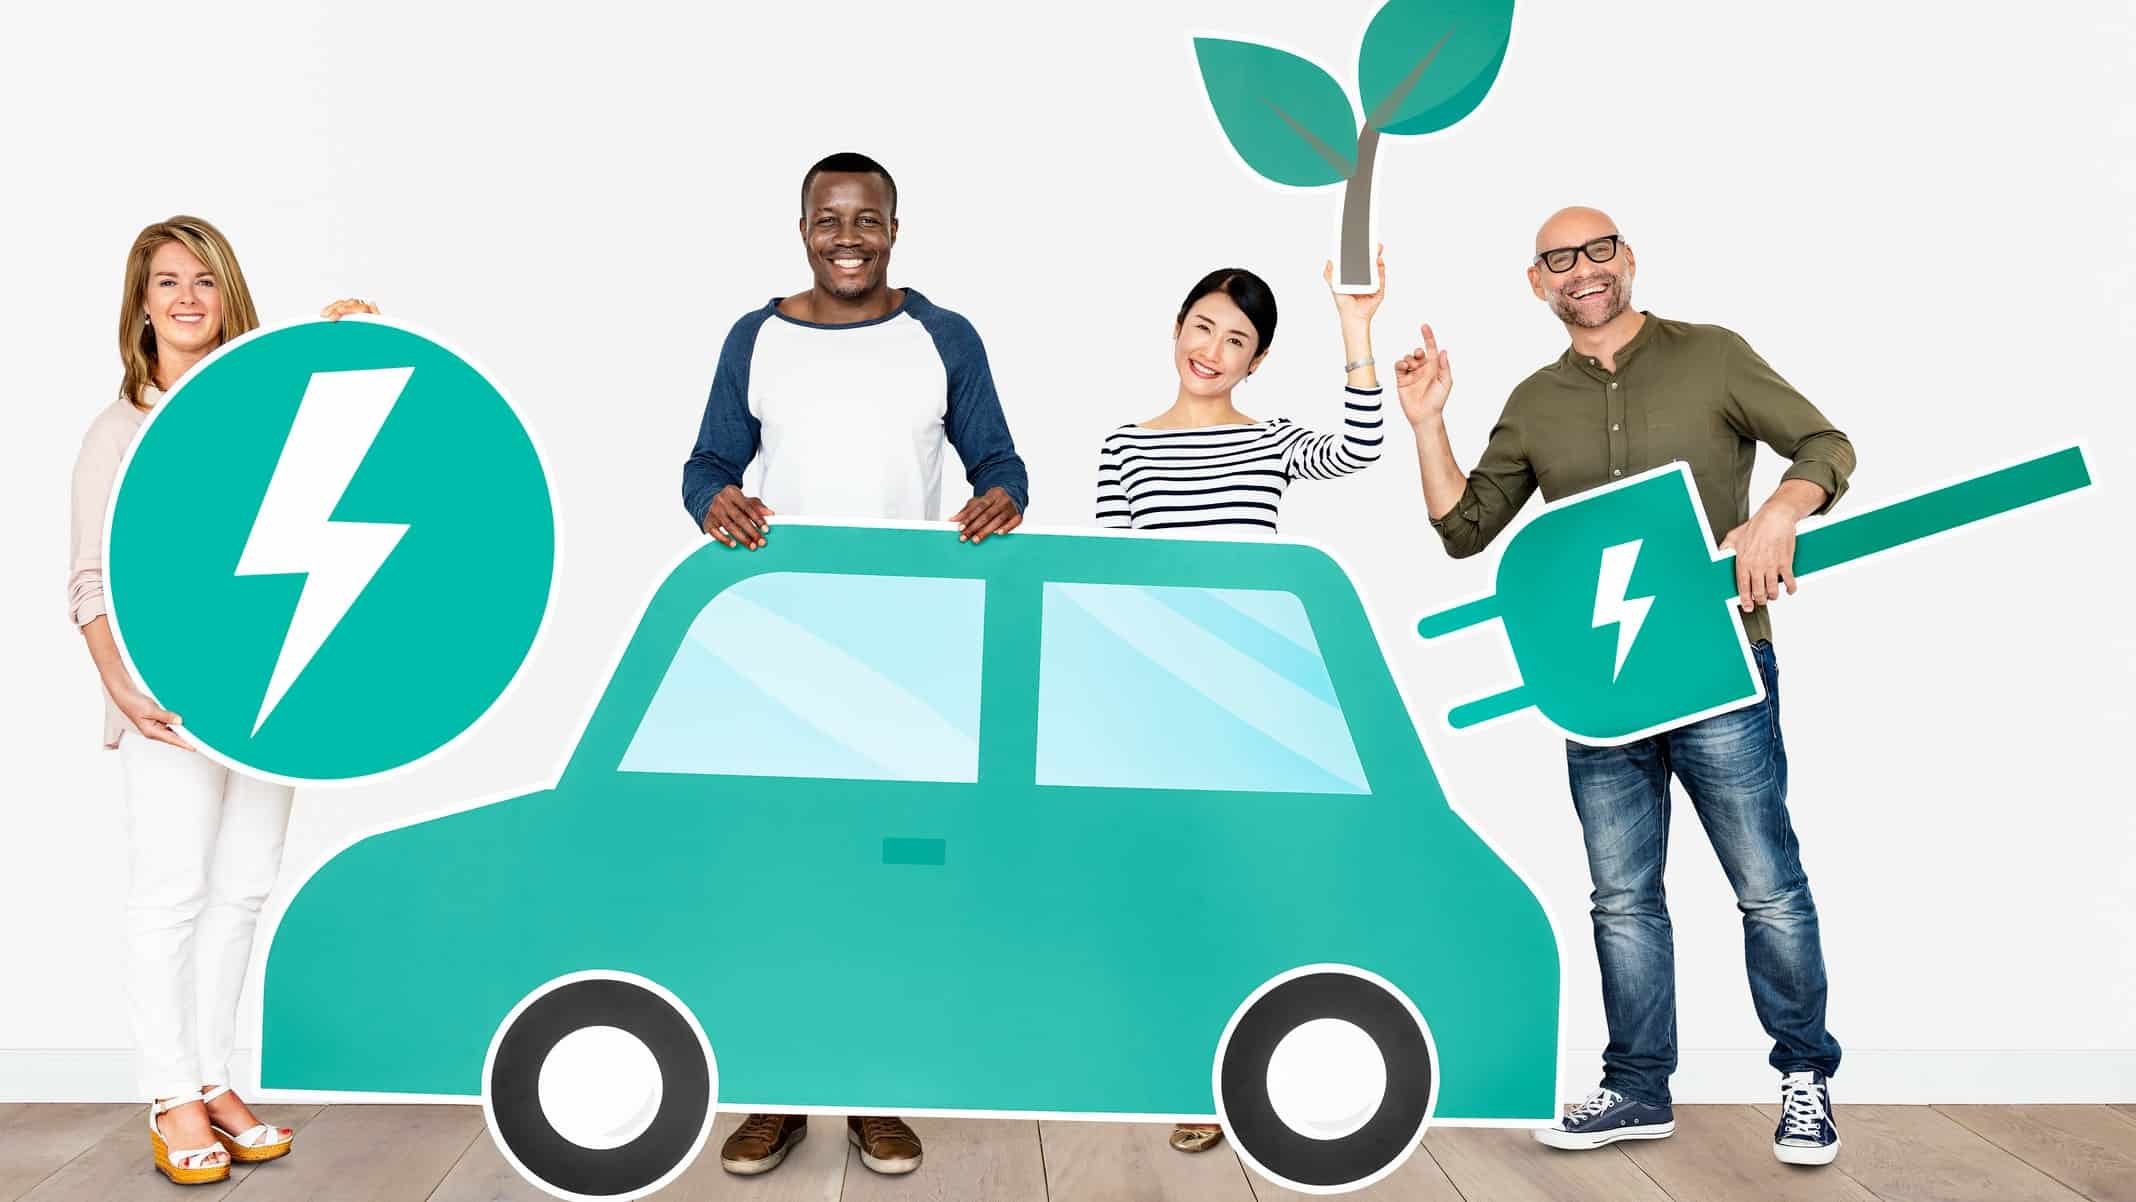 a group of four people pose behind a graphic image of a green car, holding various symbols of clean electric, lithium powered energy including energy symbols and a green plant.